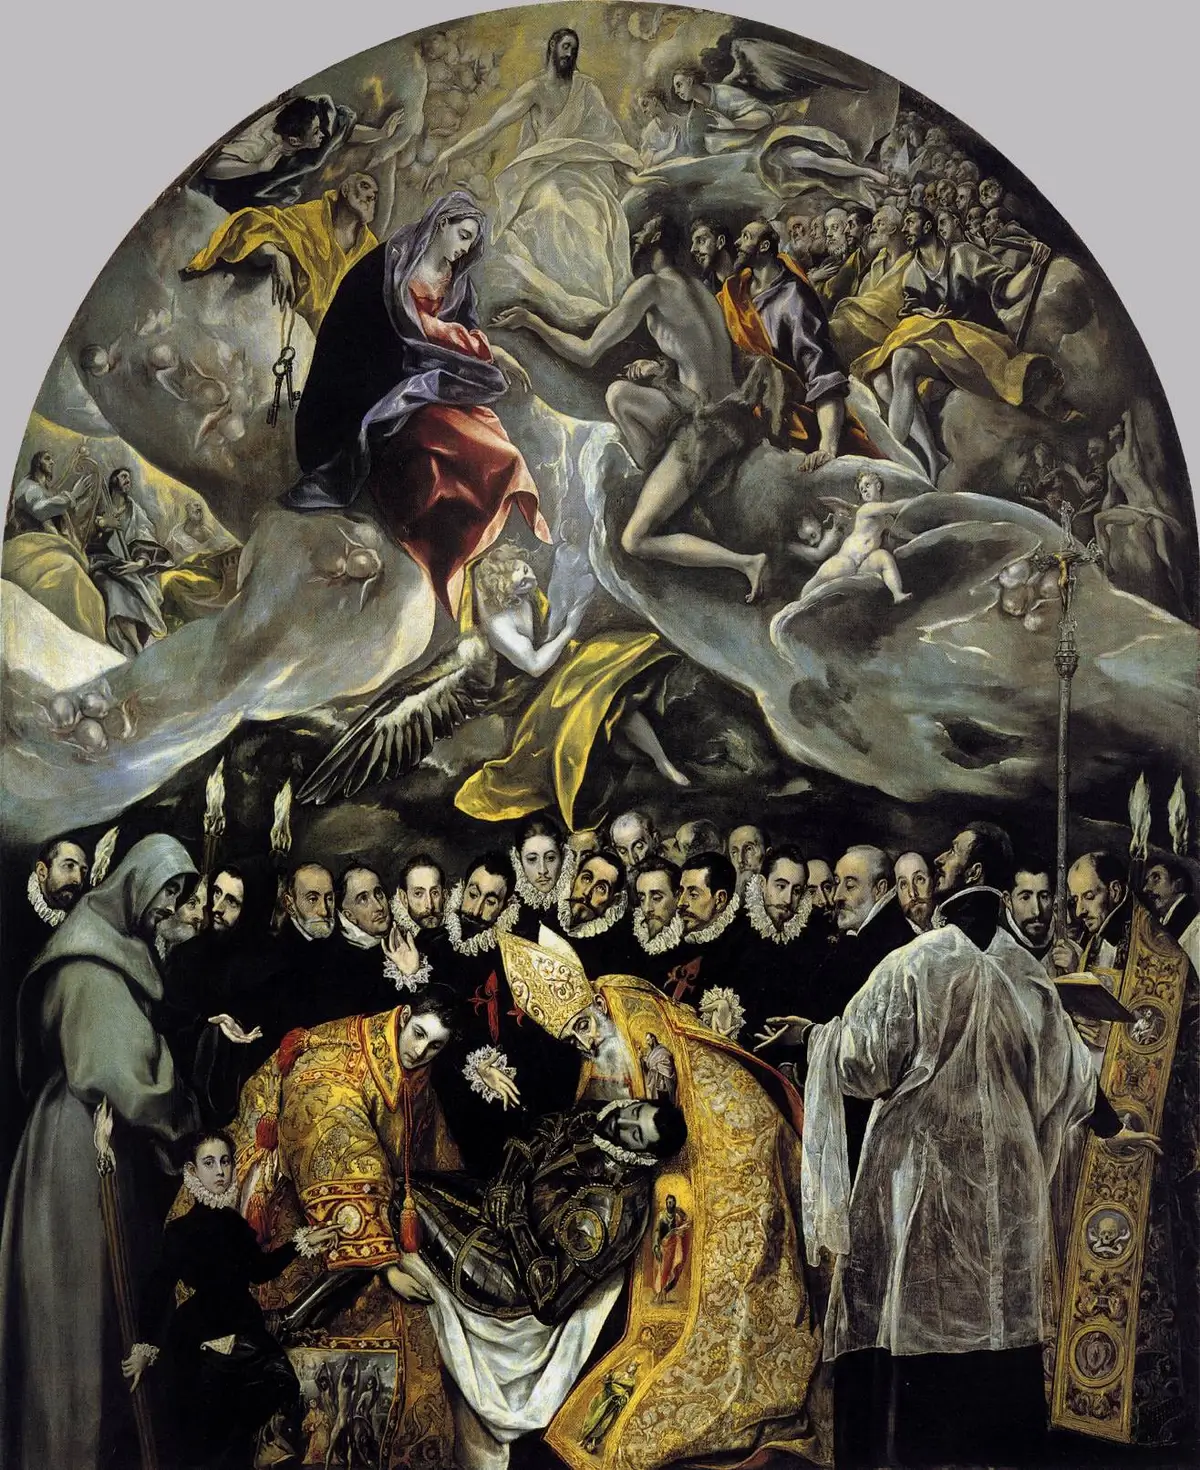 El Greco, "The Burial of the Count of Orgaz", 1586